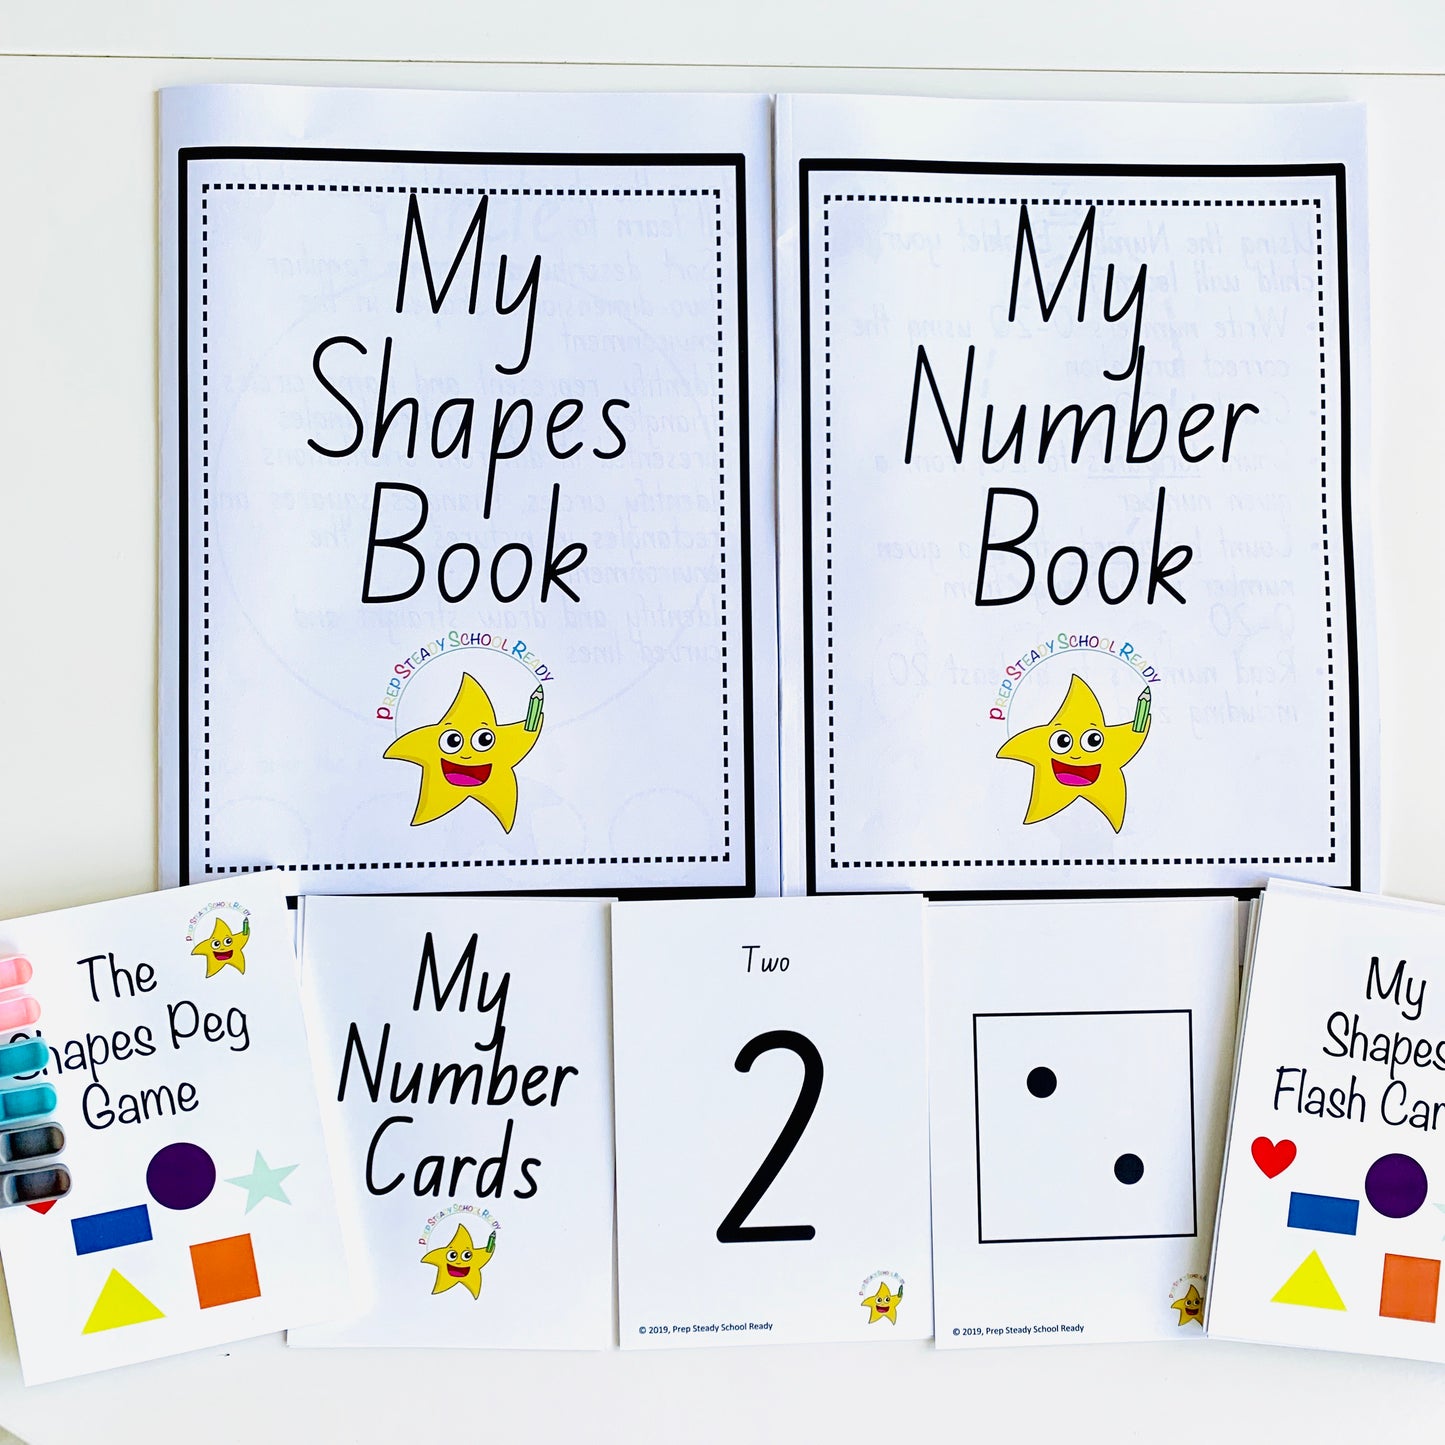 The ULTIMATE Pack- Literacy And Numeracy Pack